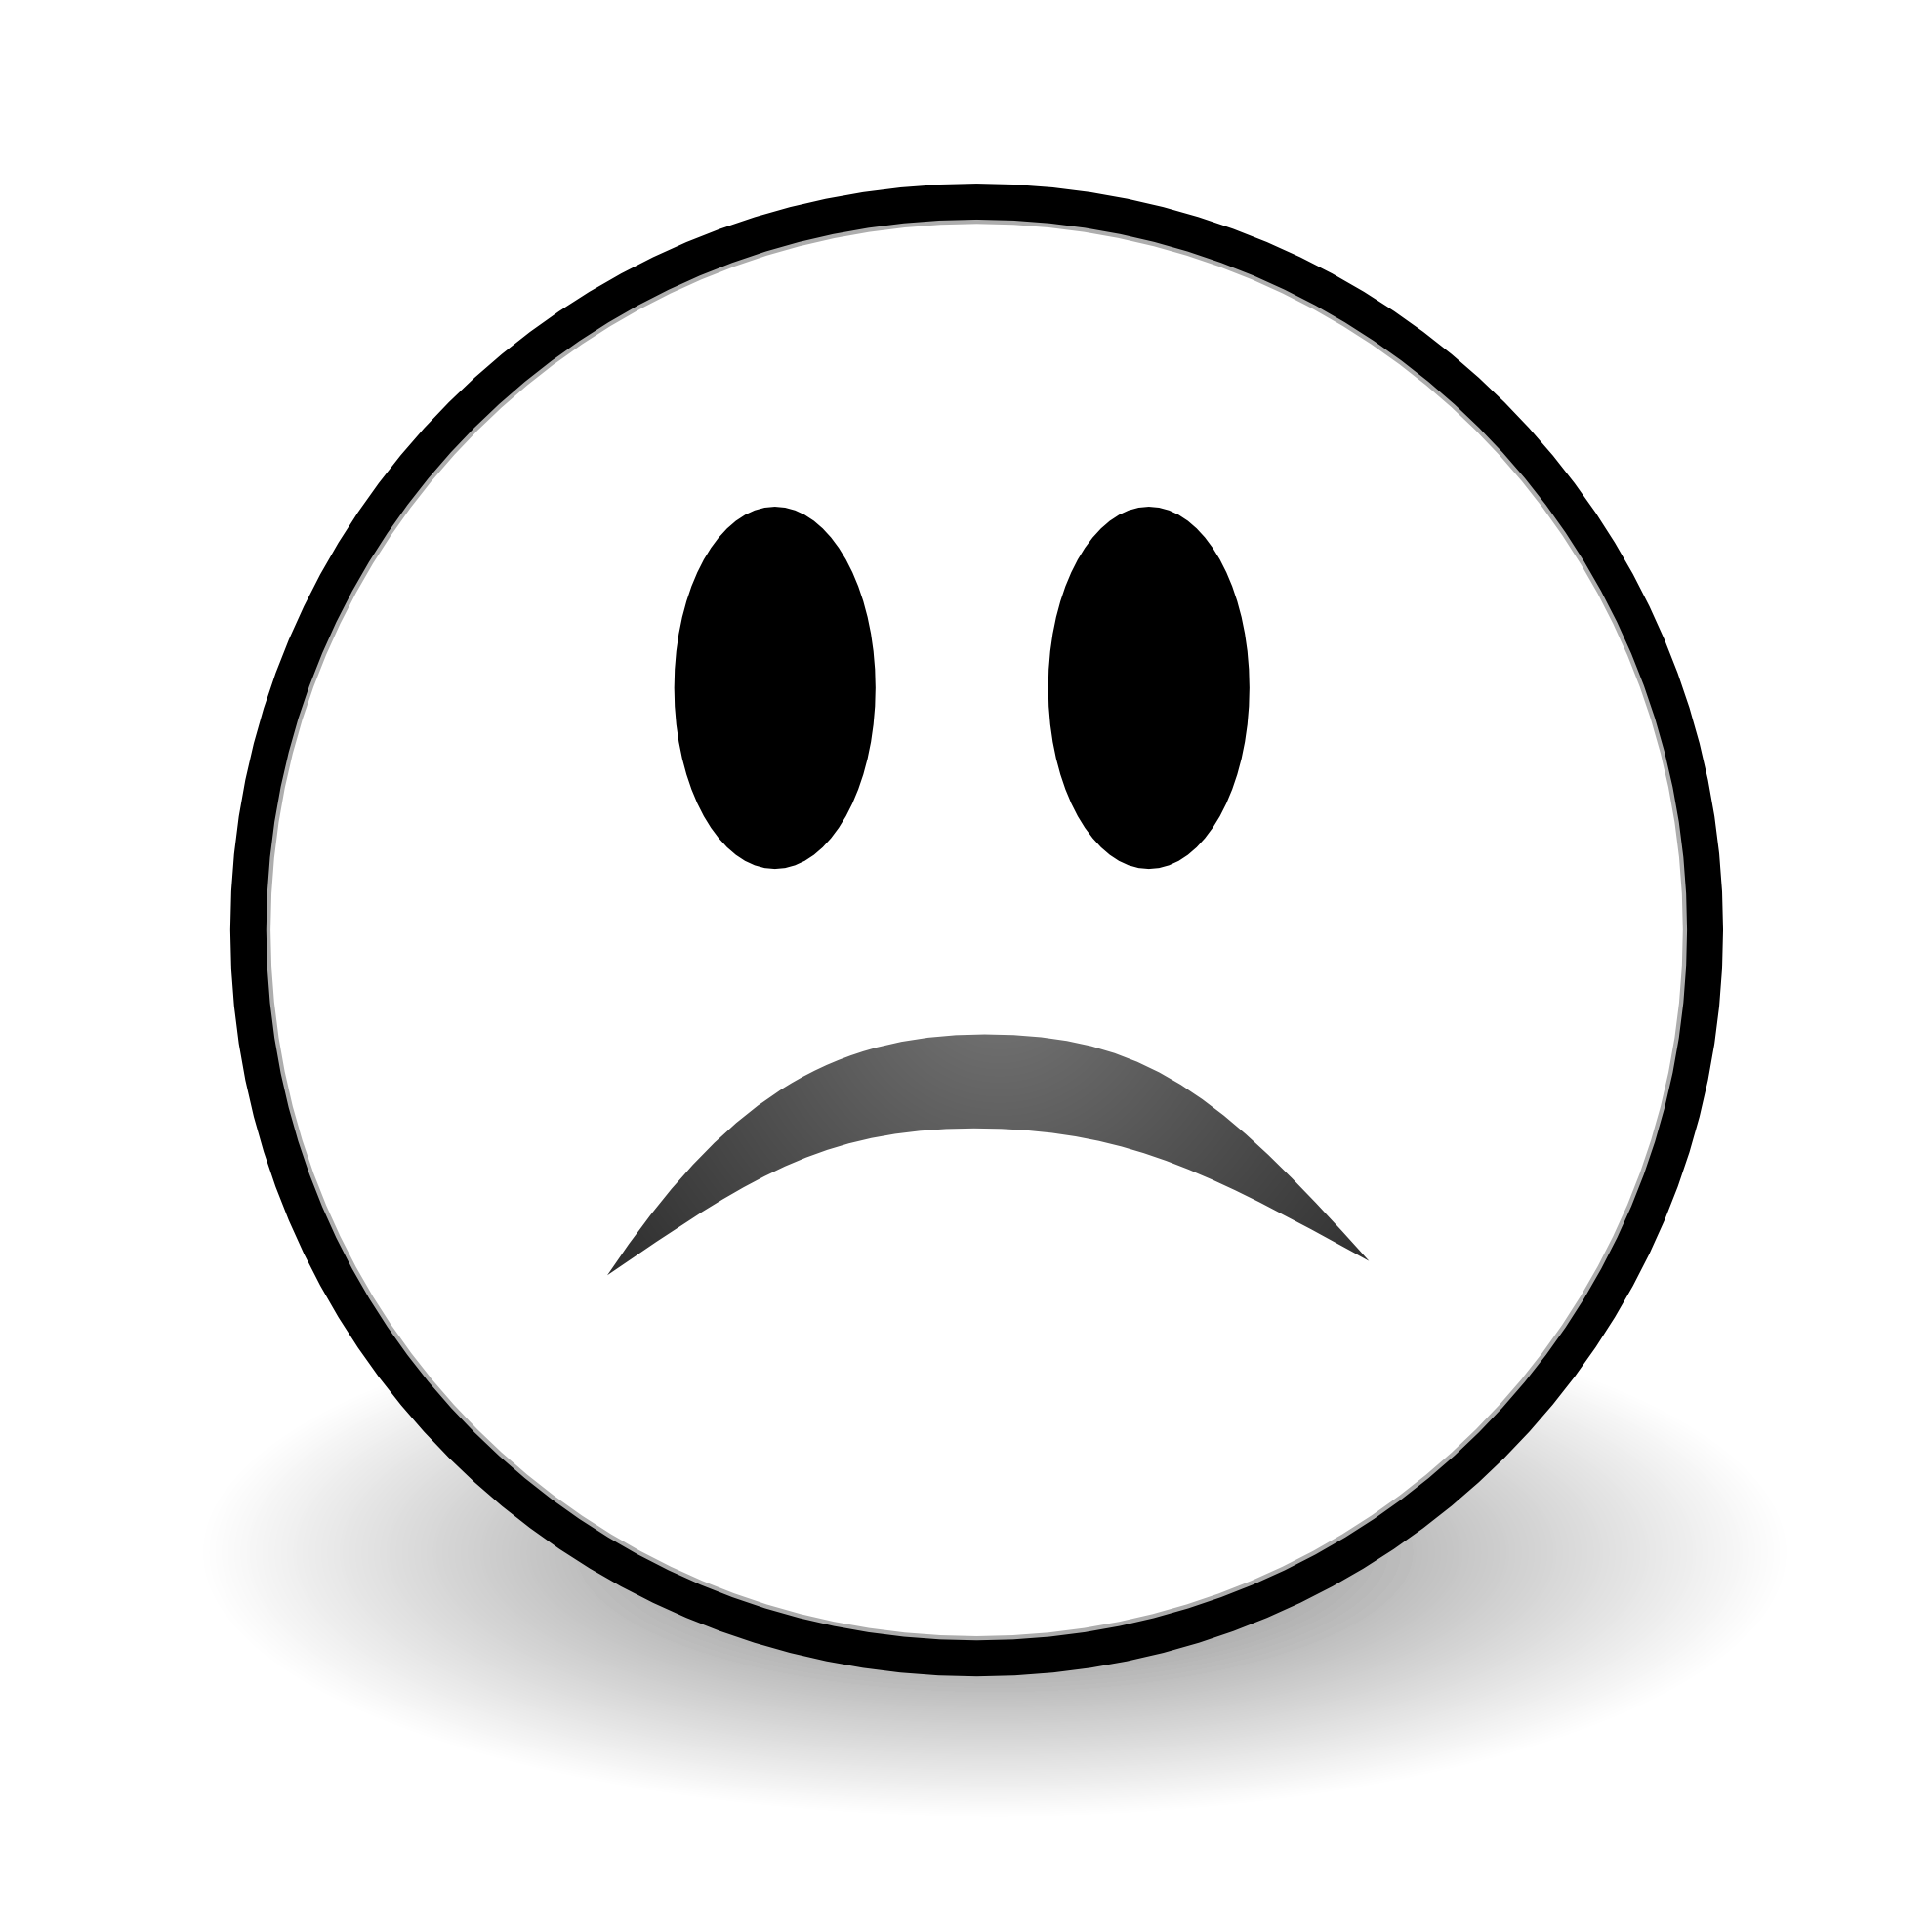 Sad face clipart black and white free images 2.